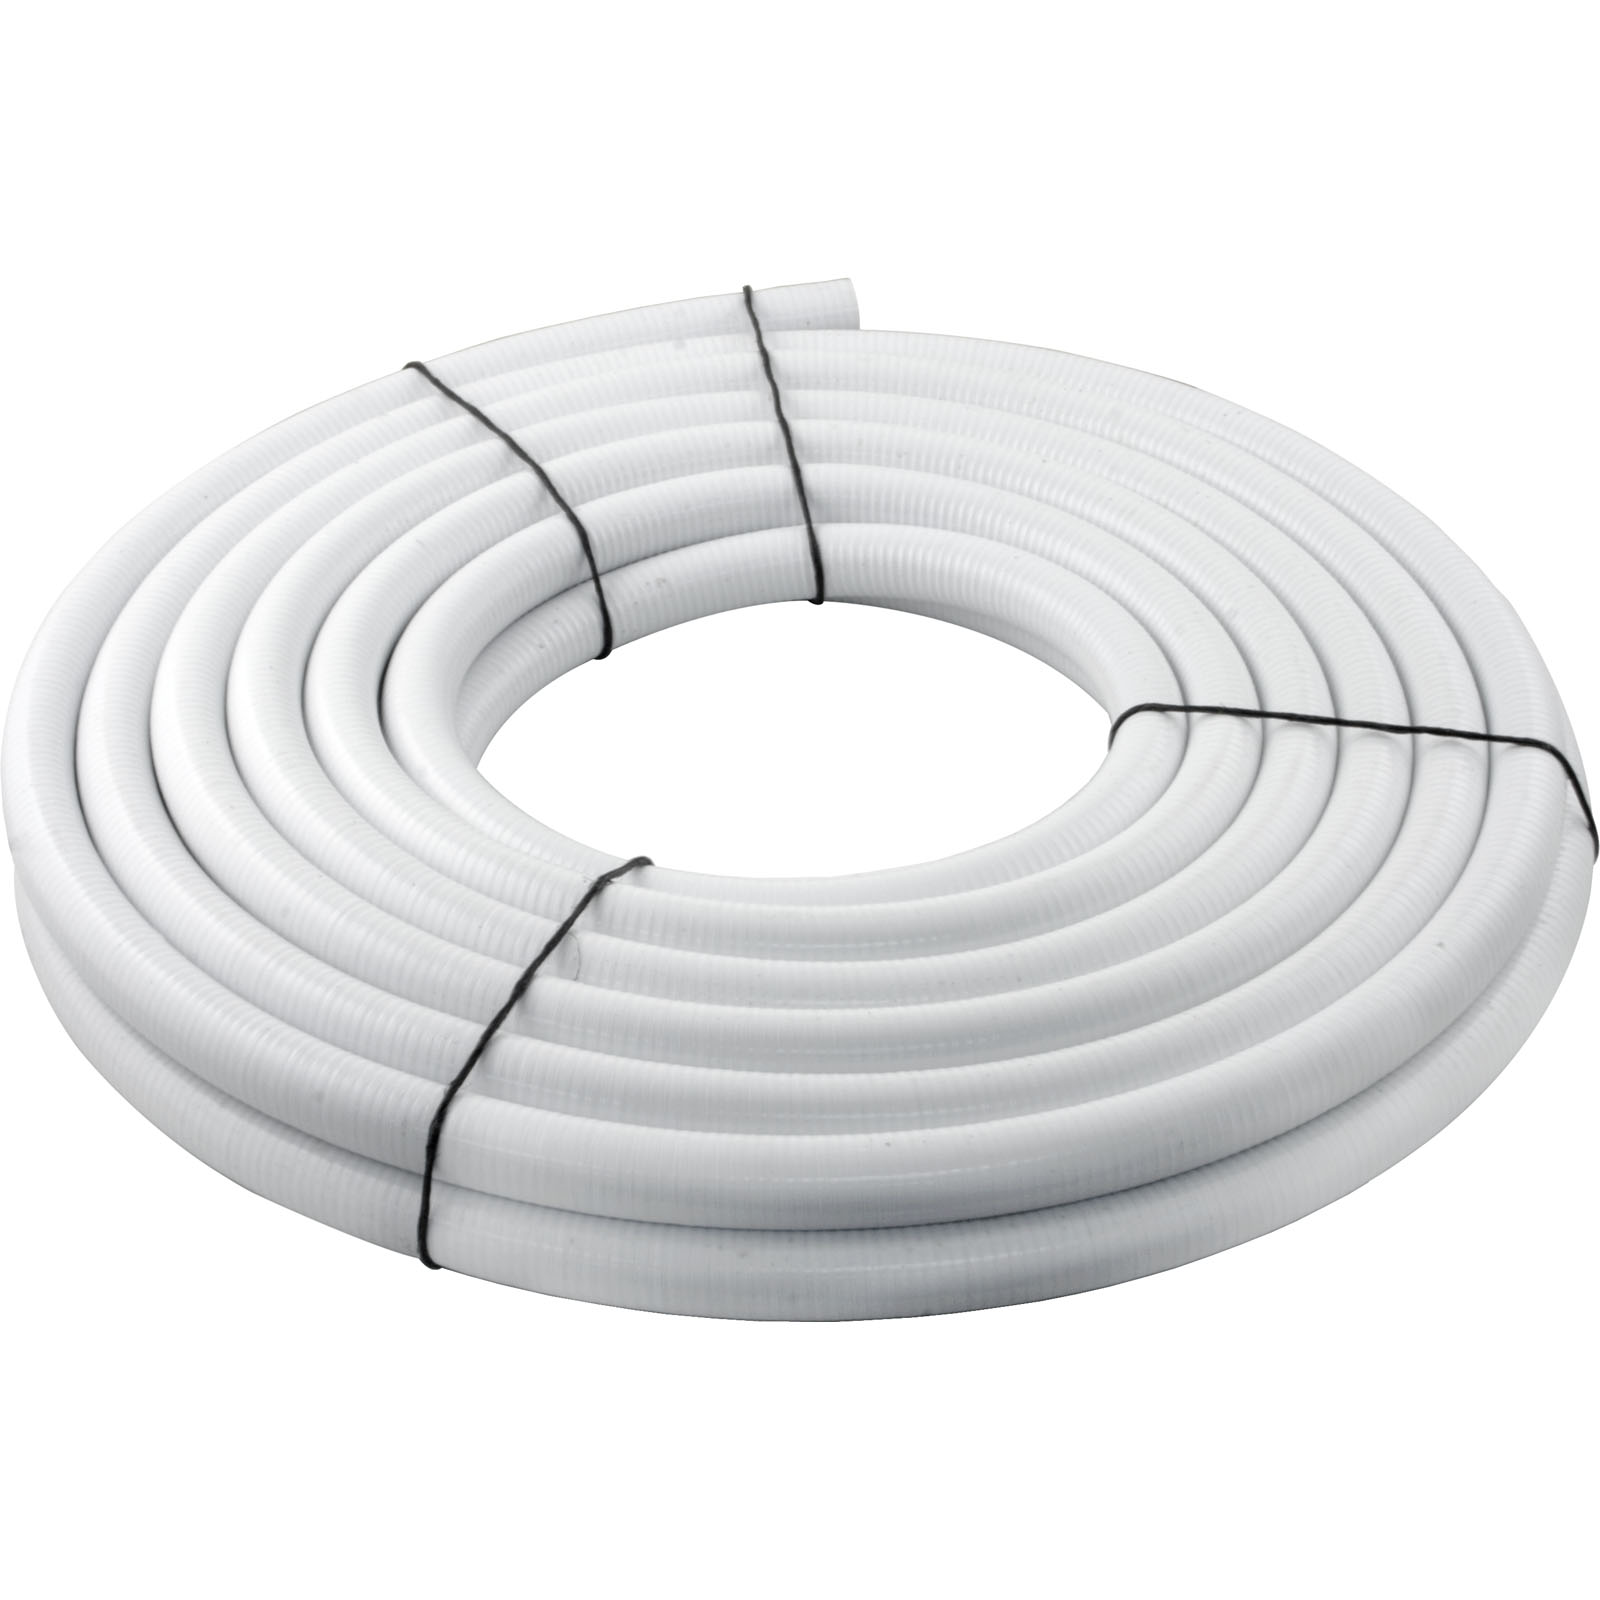 Picture of Flexible PVC Pipe, 3/4" x 50 foot